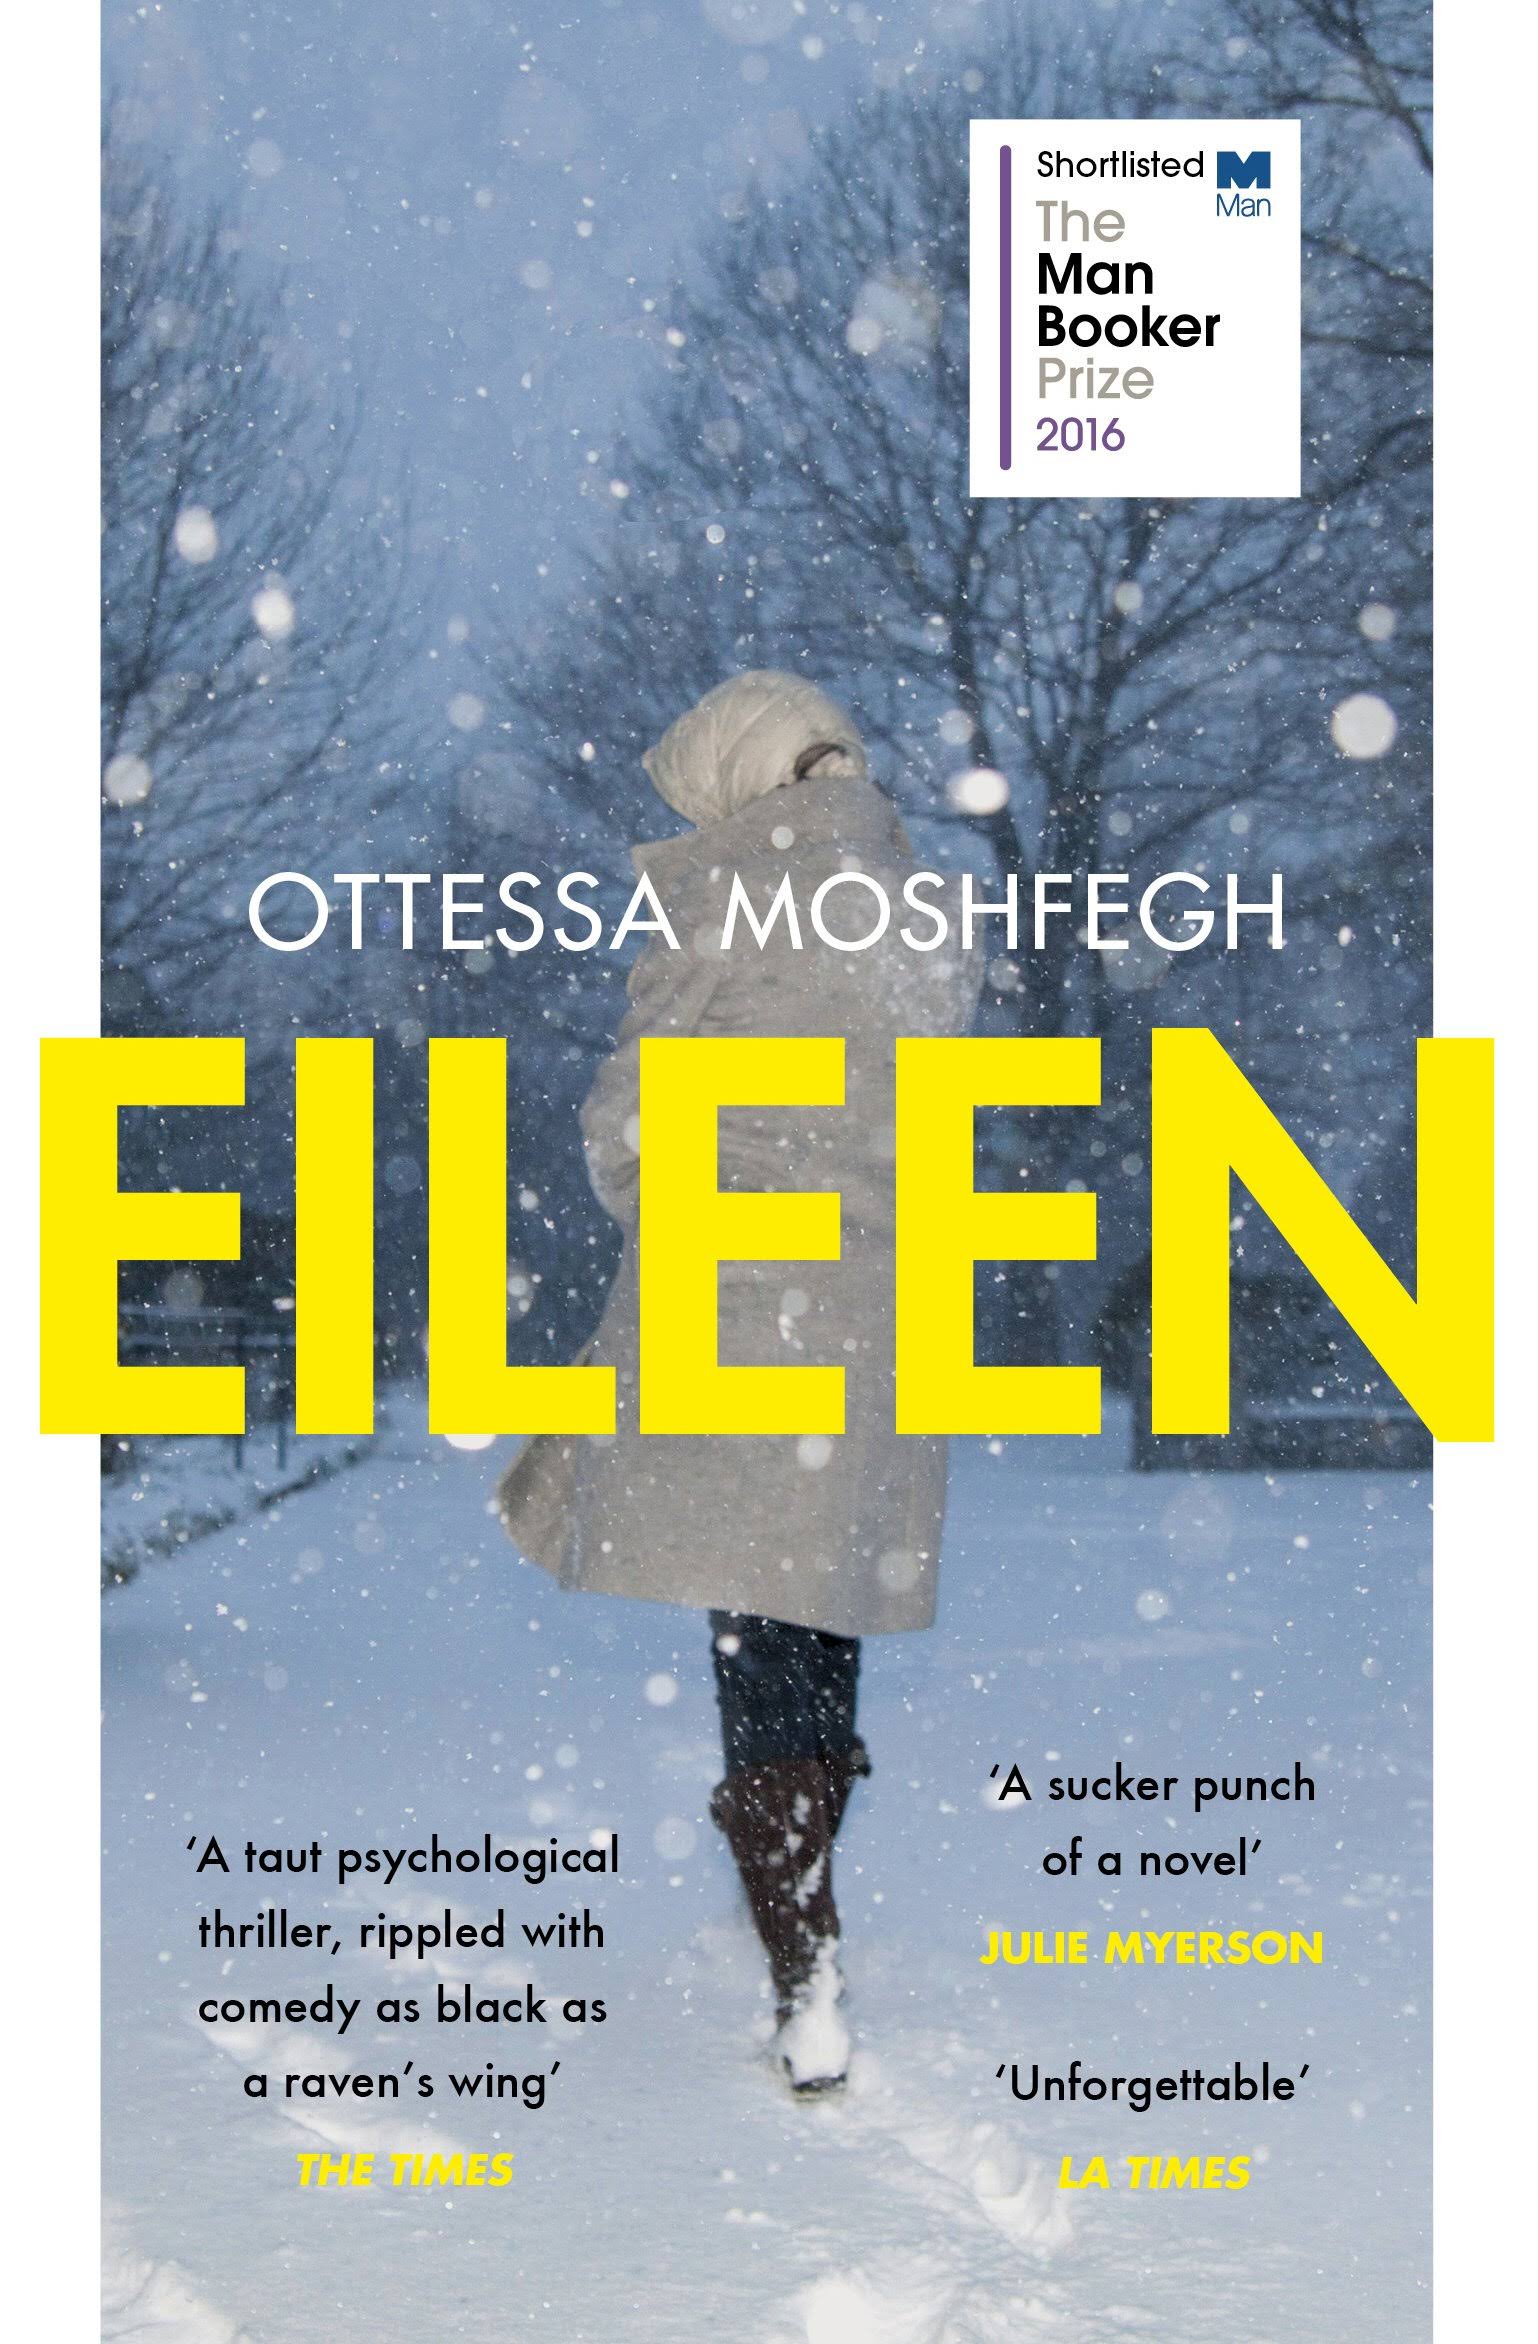 Eileen: Shortlisted for the Man Booker Prize - Ottessa Moshfegh